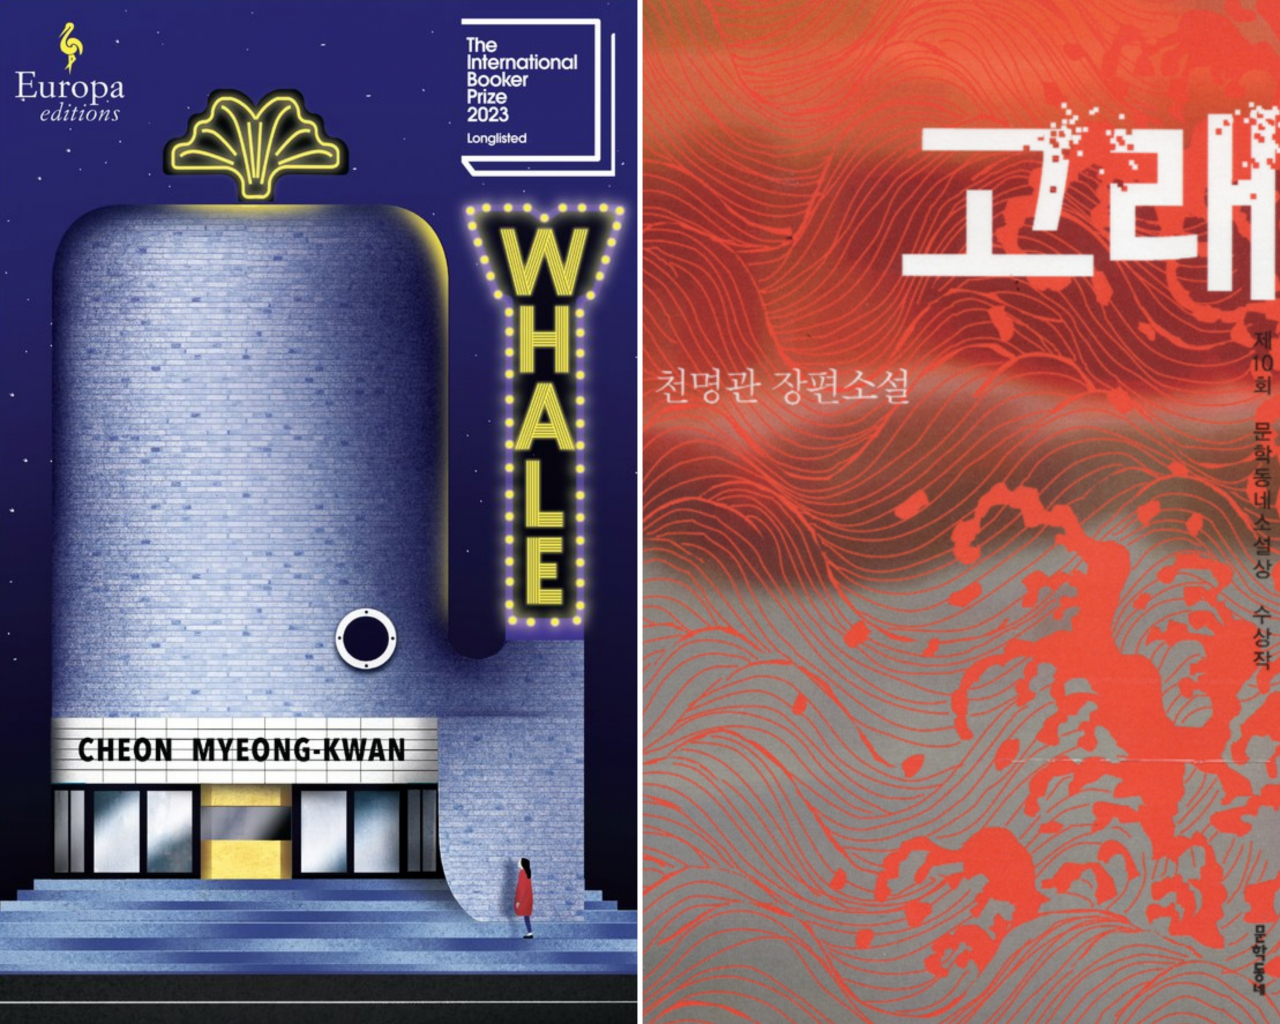 English edition (left) and Korean edition of 